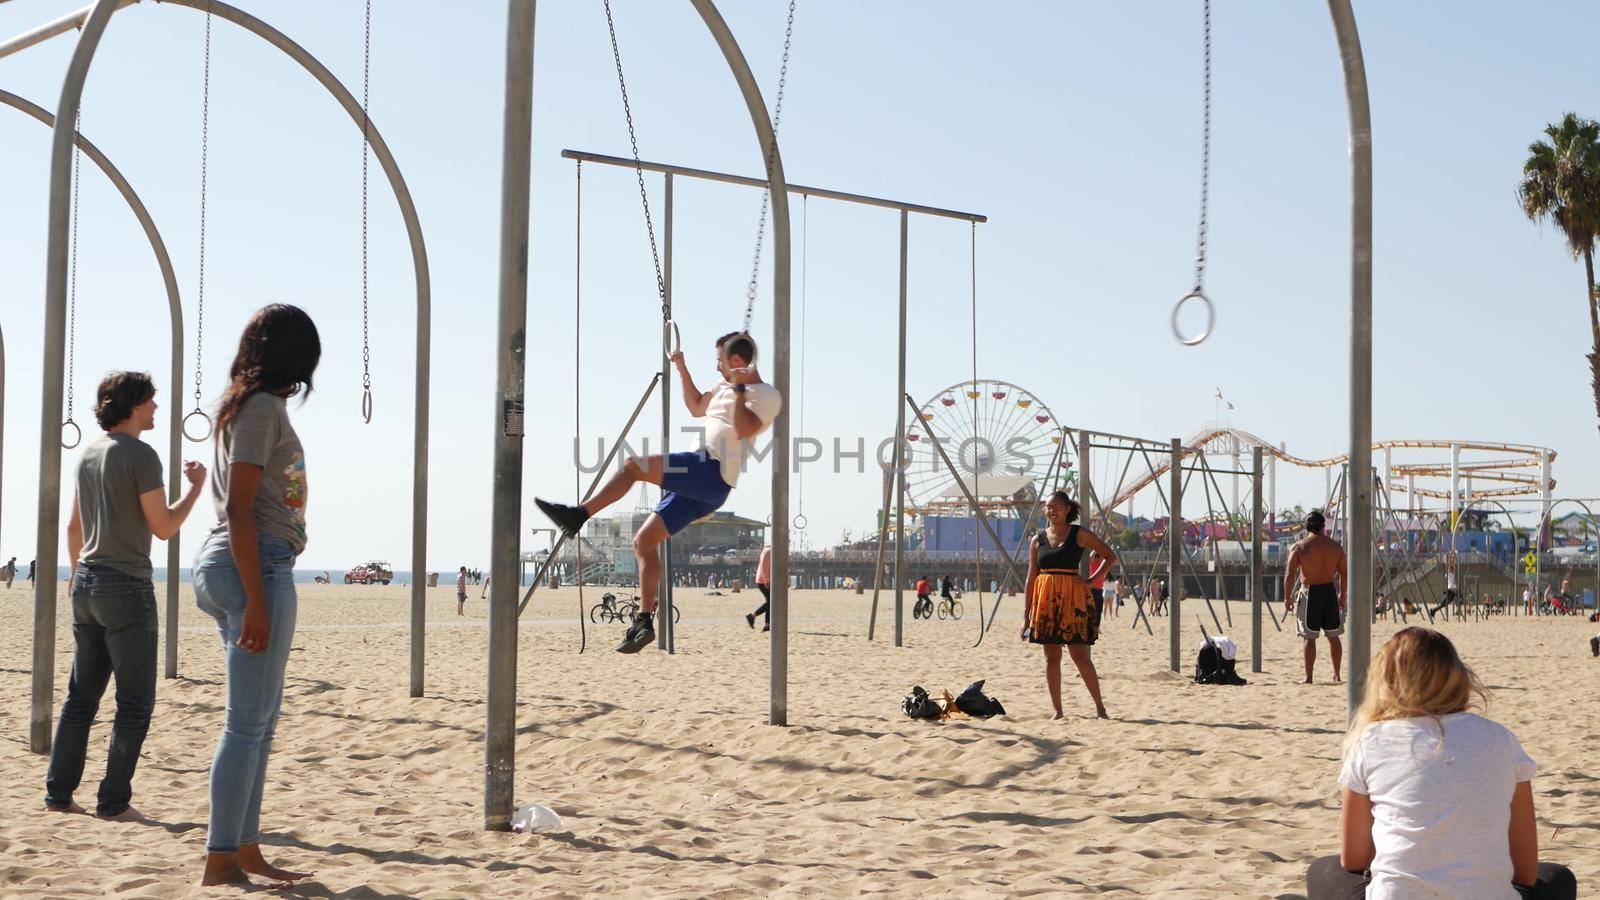 SANTA MONICA, LOS ANGELES CA USA - 28 OCT 2019: California summertime pacific ocean beach aesthetic, young people training and having fun on sports ground. Muscle beach and amusement park on pier by DogoraSun